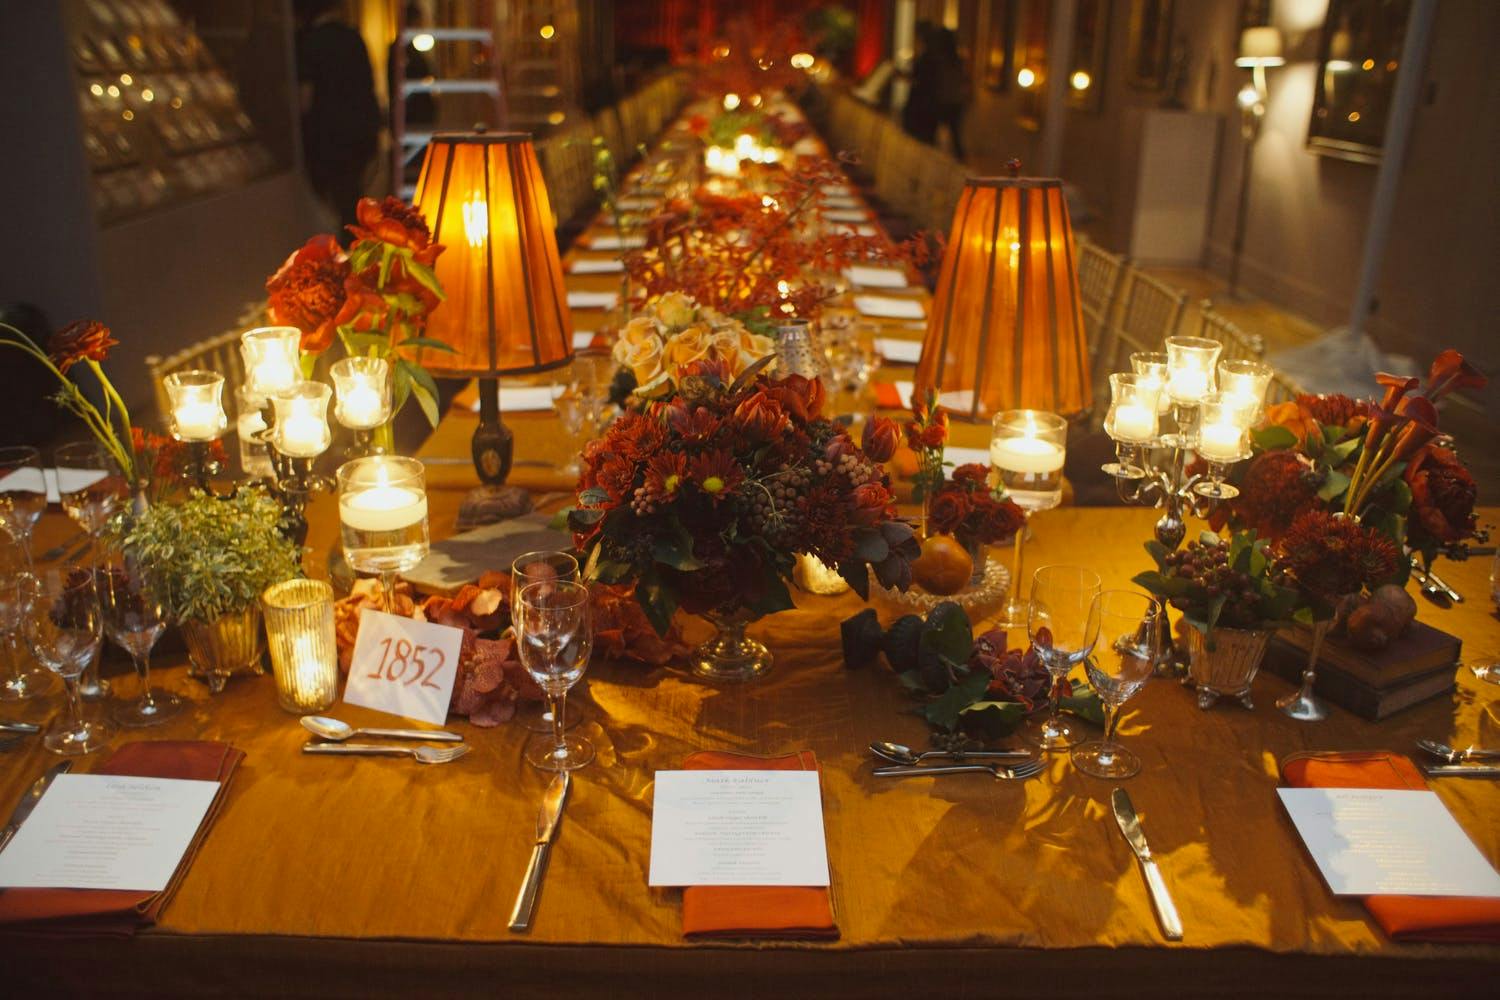 Fall wedding table with amber lamps, vintage books, and gold and flowers | PartySlate